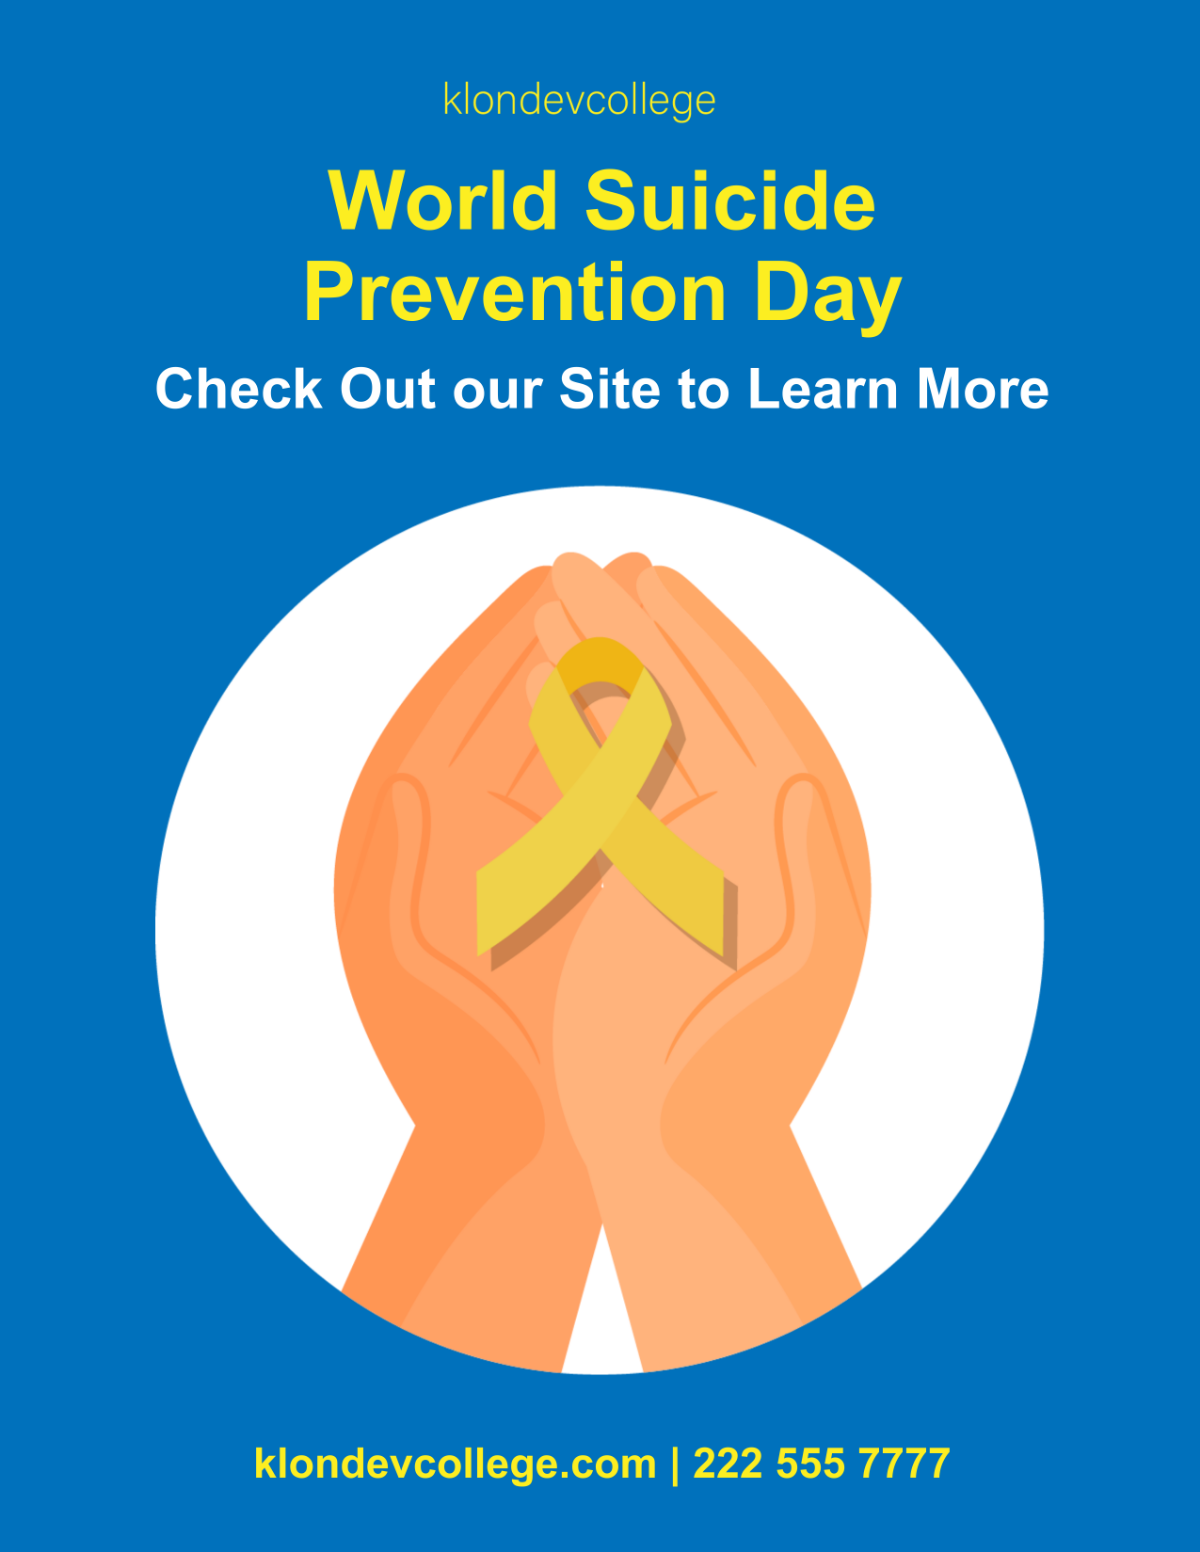 World Suicide Prevention Day  Flyer